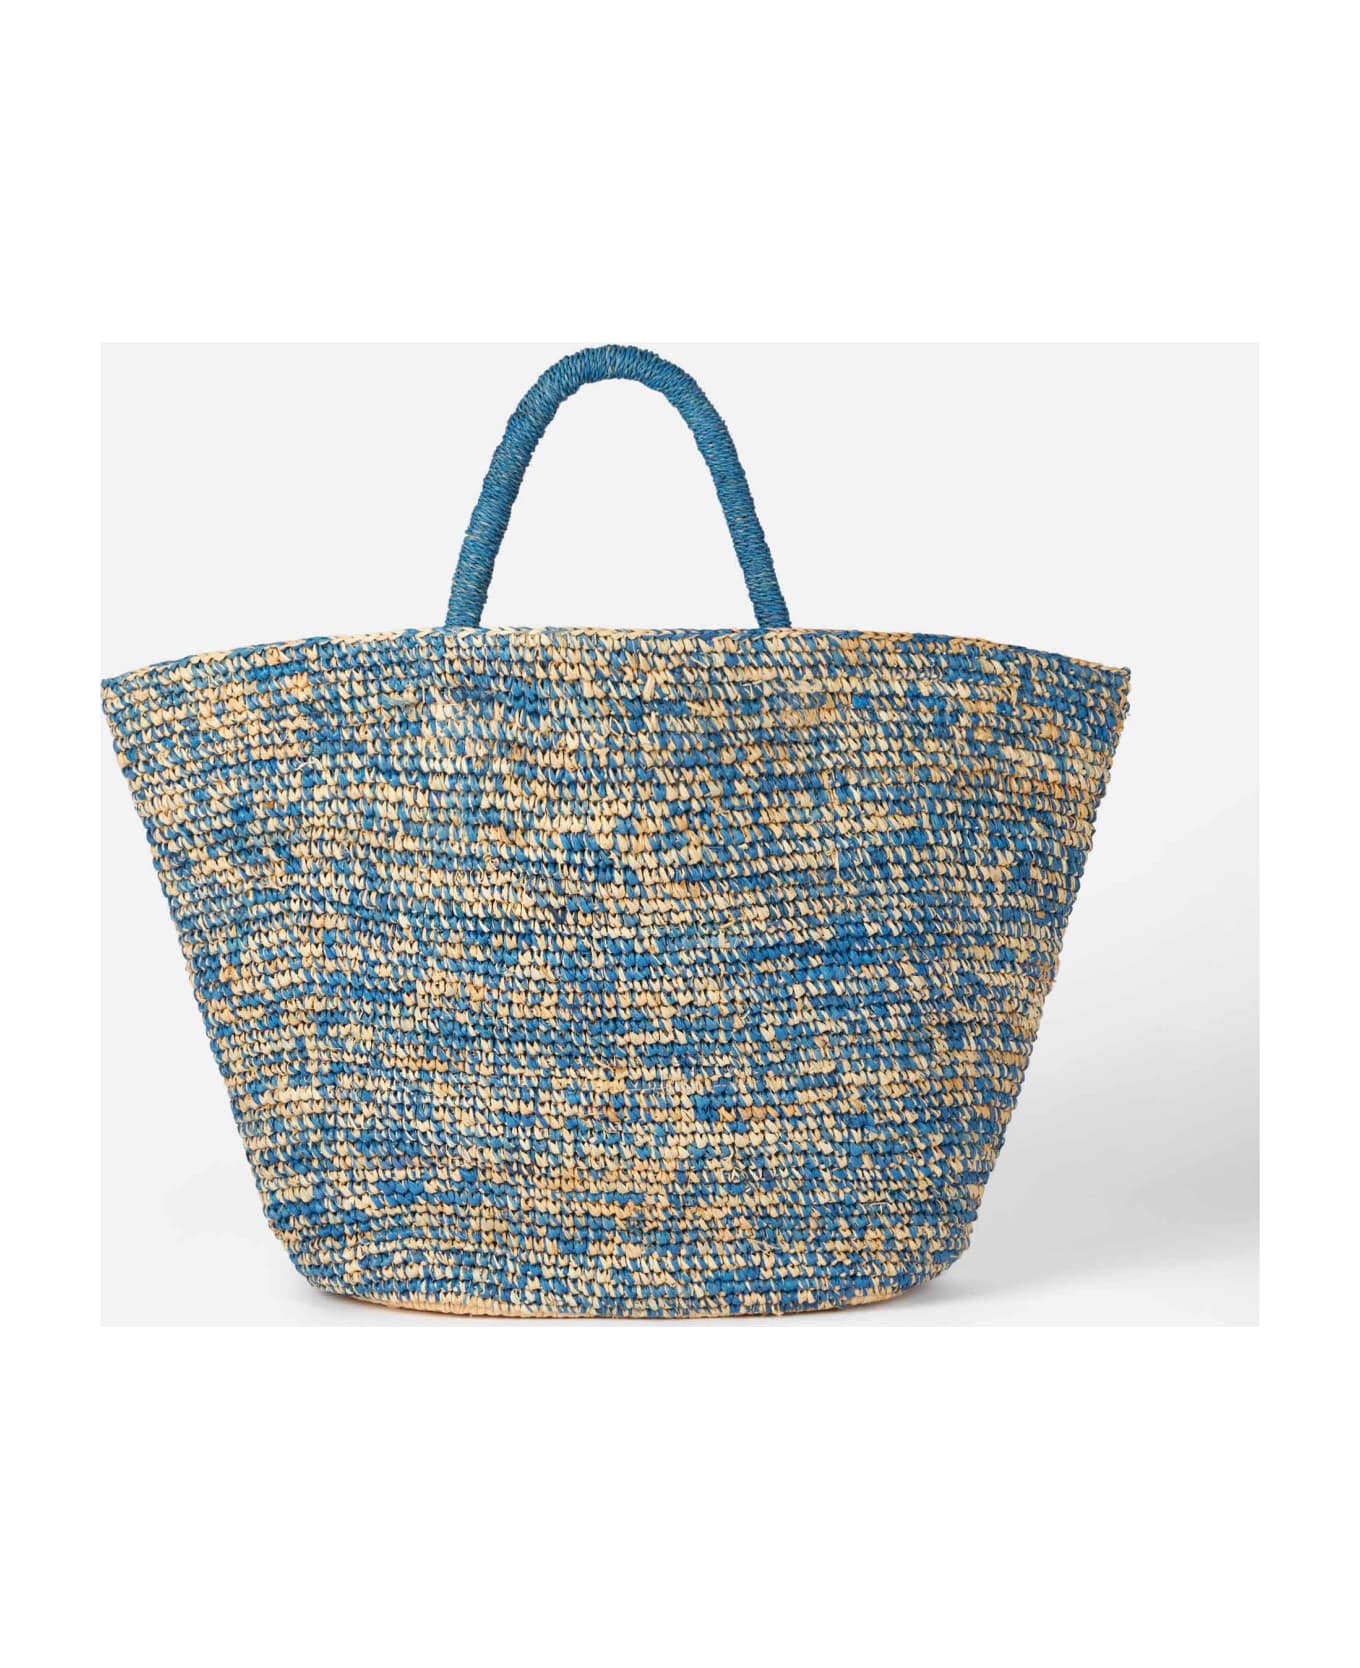 MC2 Saint Barth Raffia Blue And White Bag With Front Embroidery - BLUE